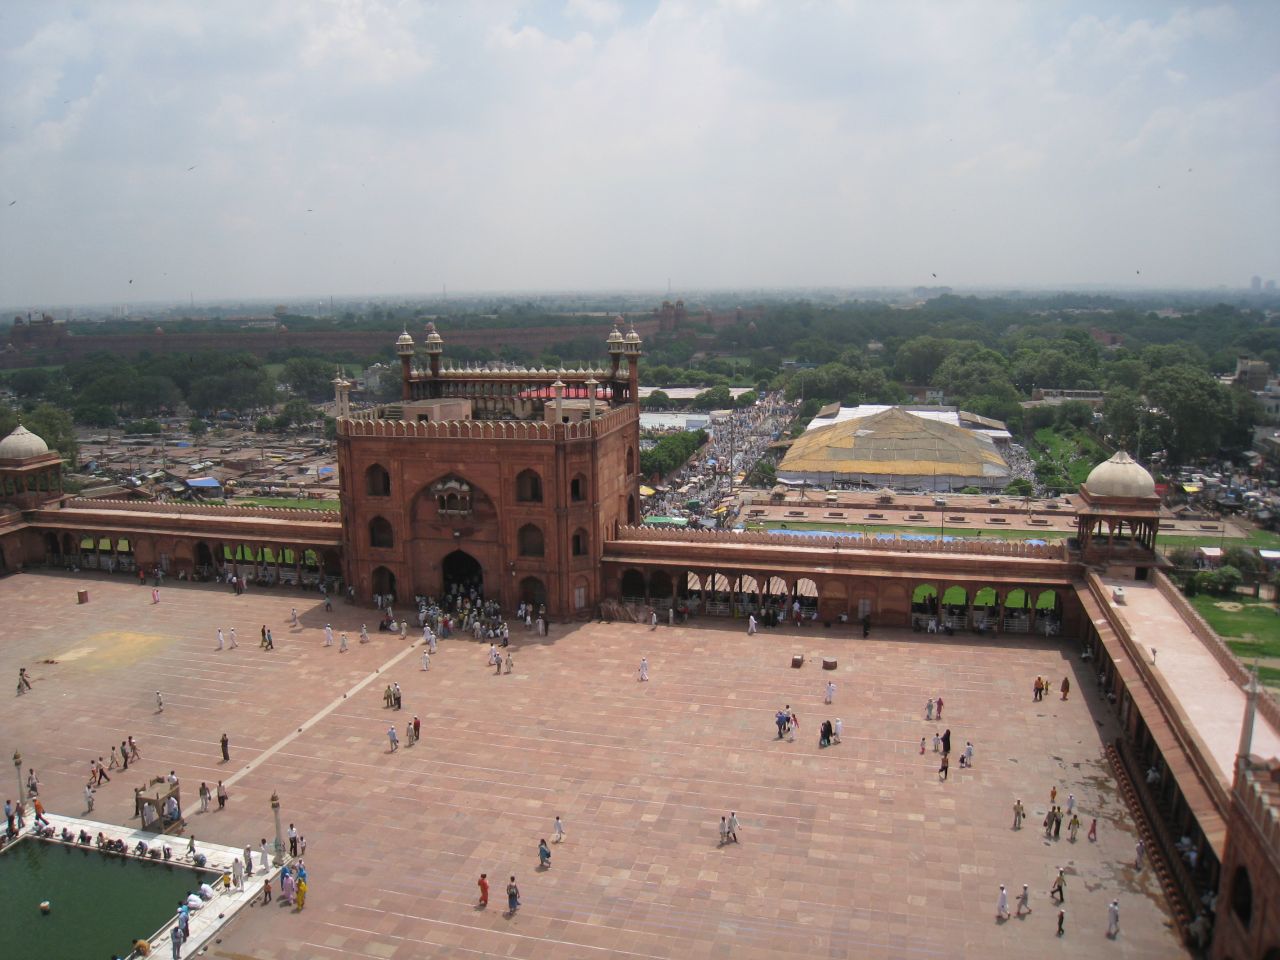 A view toward the main gate of Jama Masjid from atop a minaret, with Delhi's Red Fort in the distance.